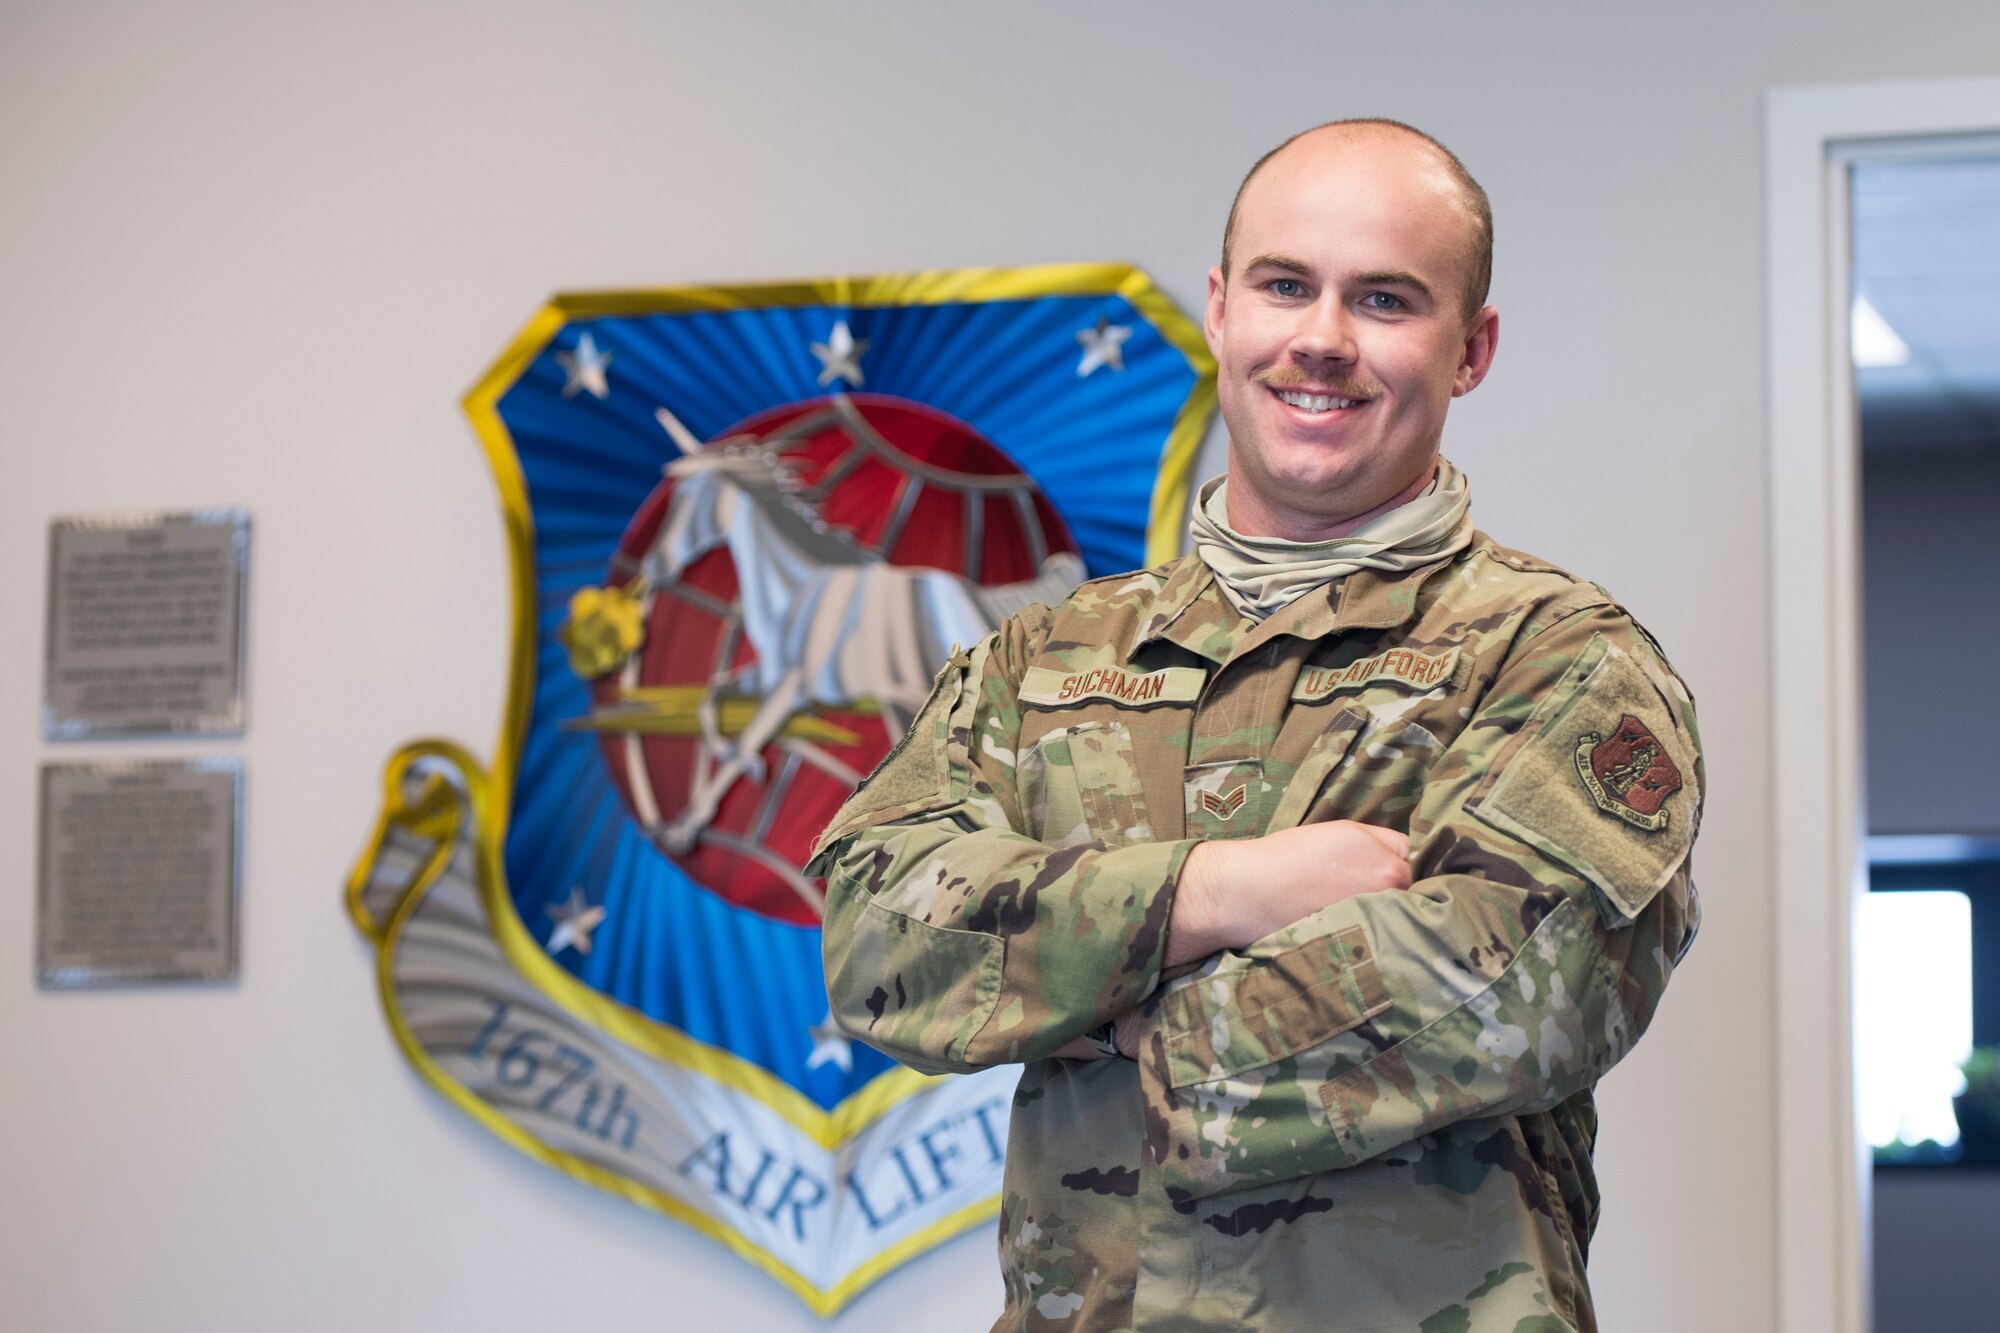 Senior Airman Robert Suchman is an administrative journeyman for the 167th Airlift Wing and the 167th Airlift Wing Airman Spotlight for August 2022.